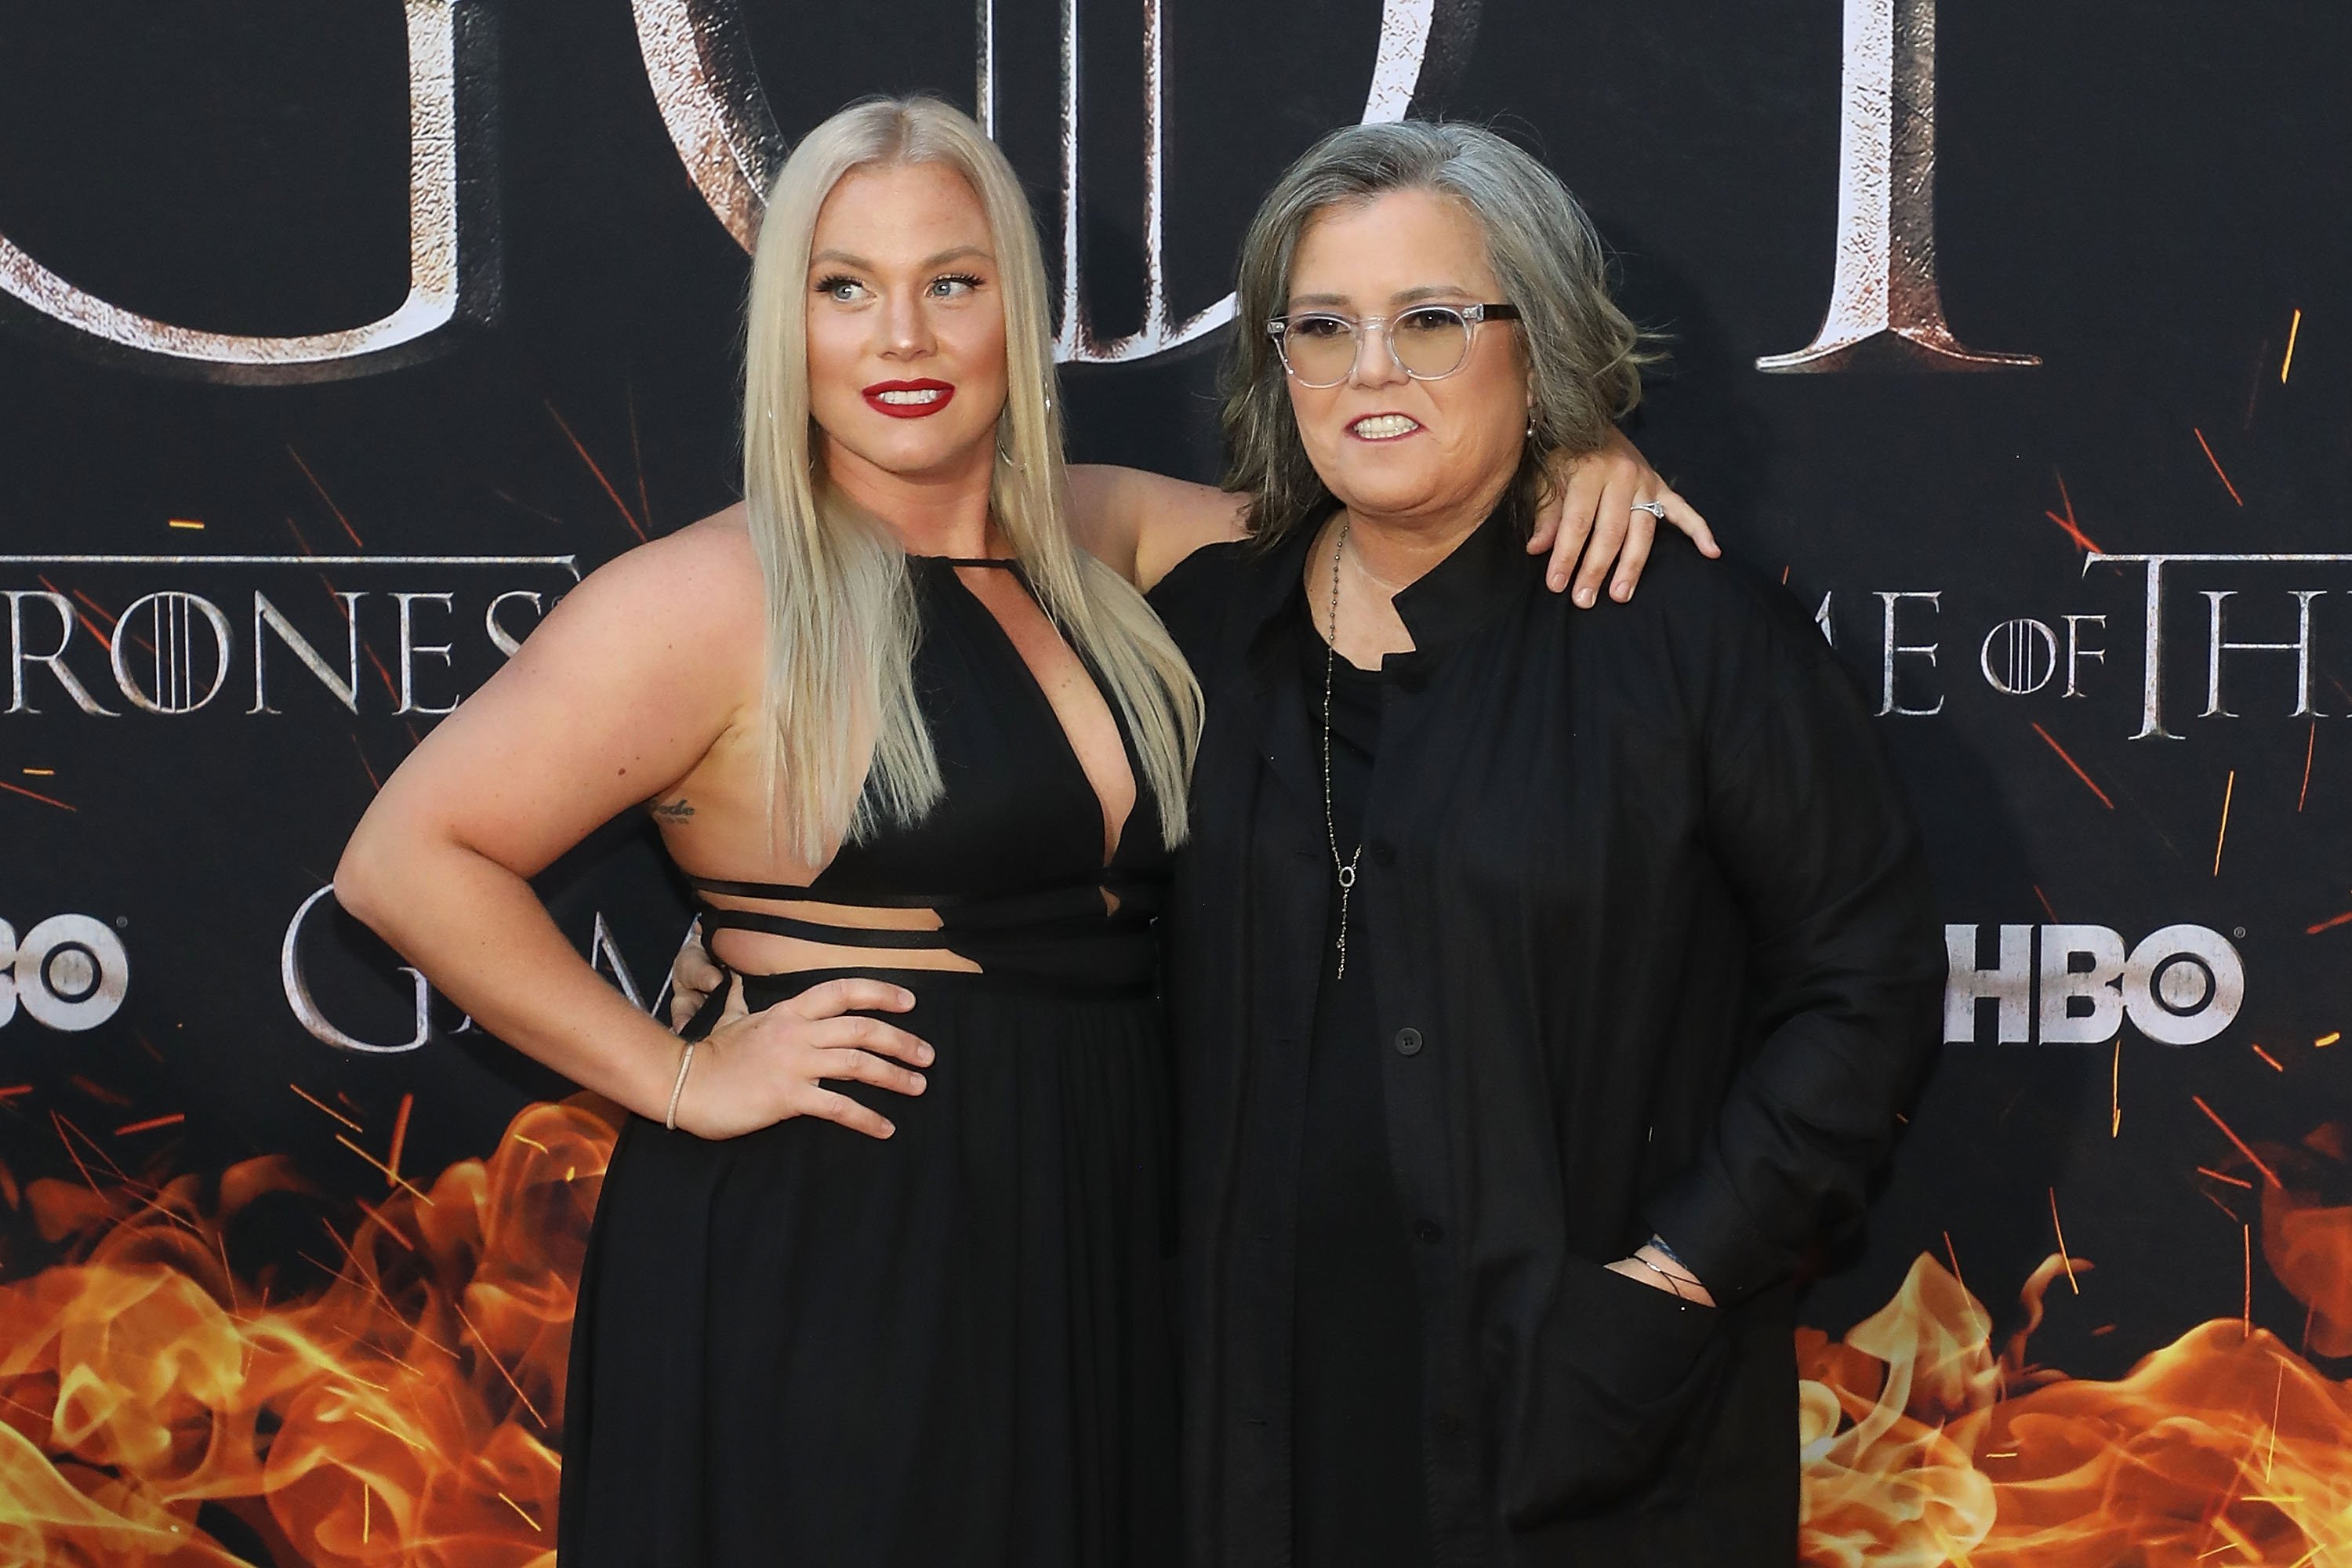 Elizabeth Rooney and Rosie O'Donnell attend the premiere of Season 8 of "Game of Thrones" in New York City on April 3, 2019 | Photo: Getty Images